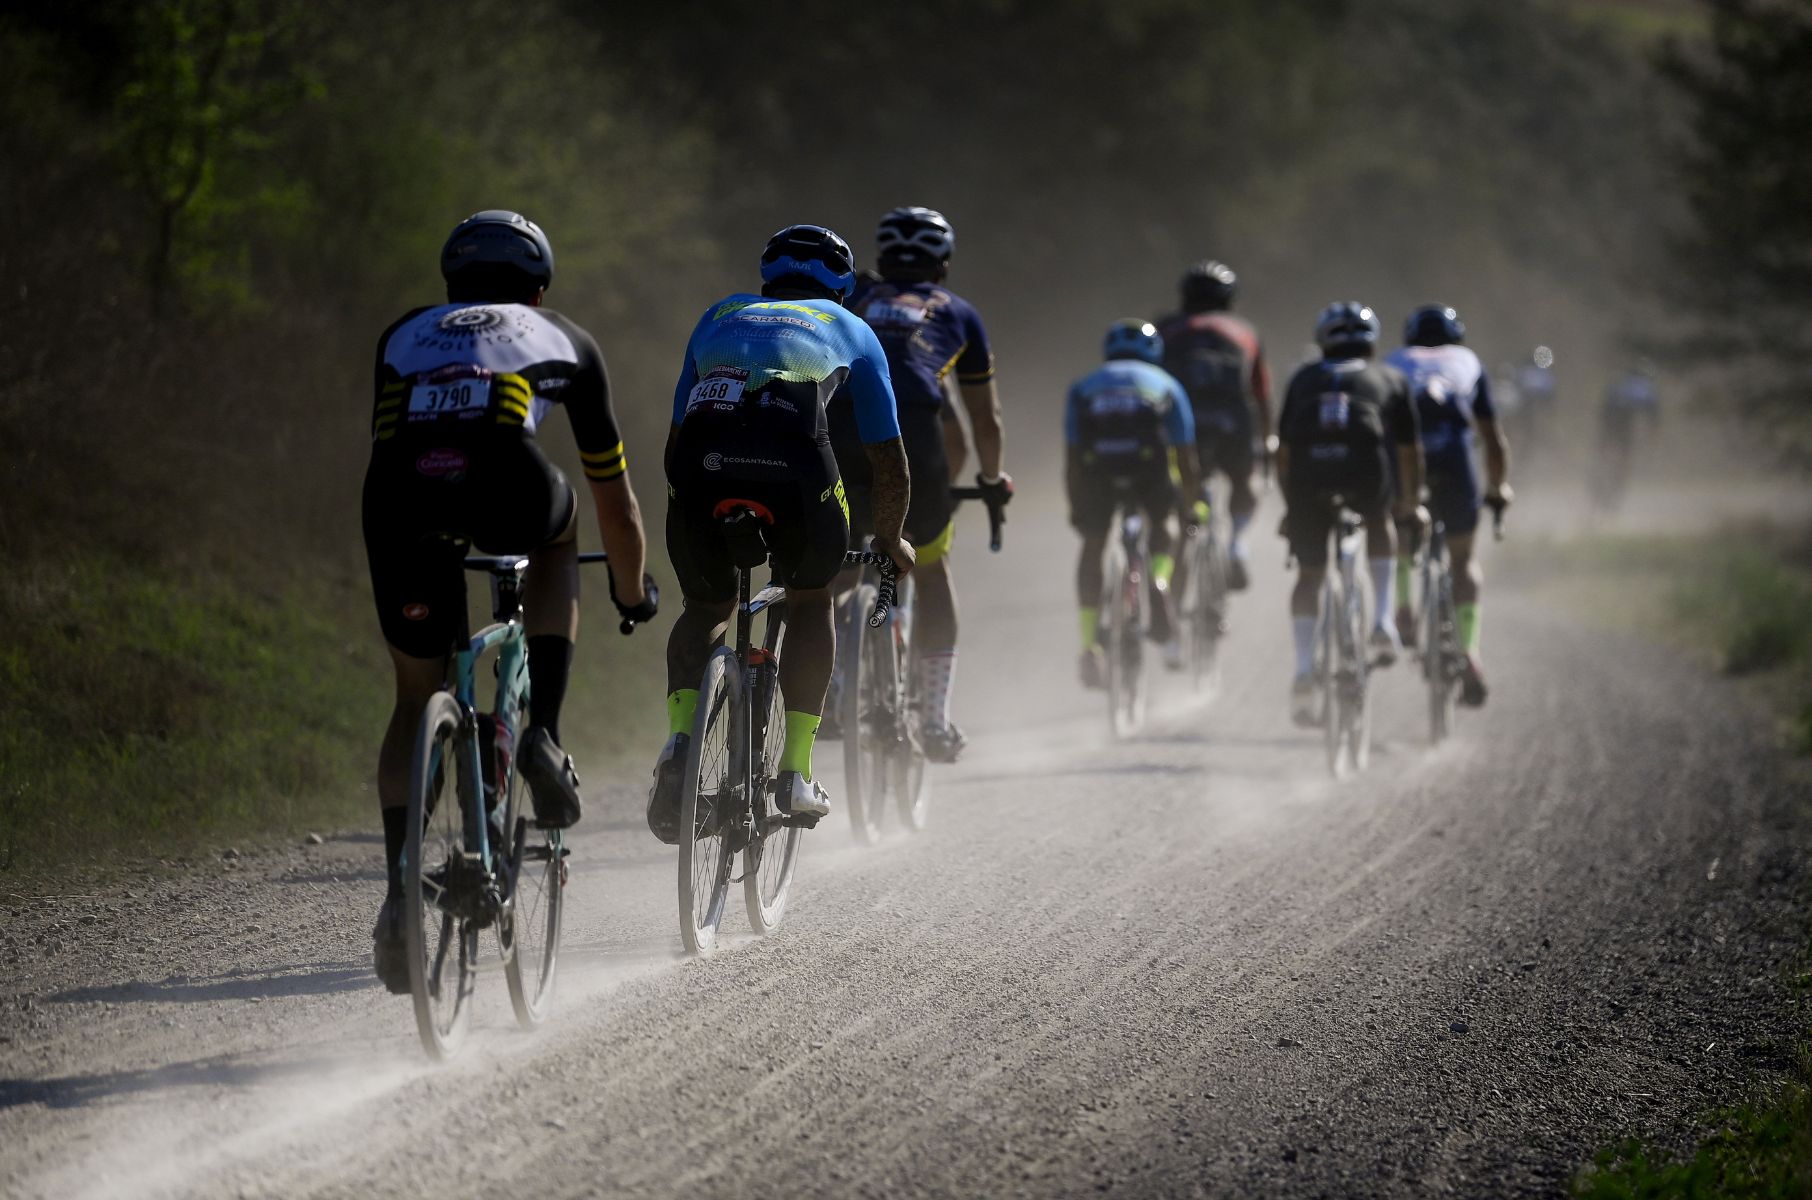 Ride safely at Enel Green Power Gran Fondo Strade Bianche